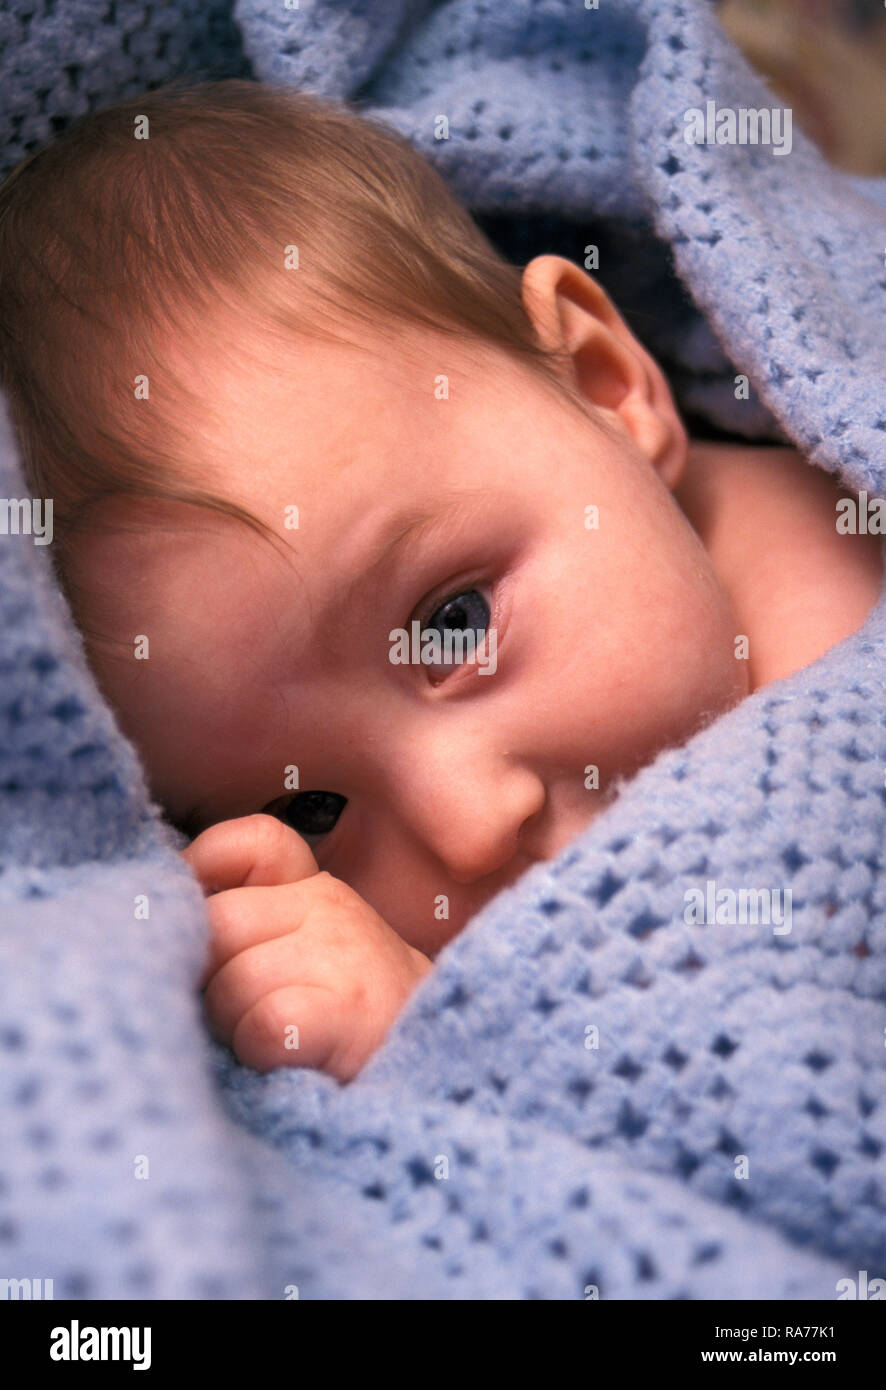 little baby peeping from under blue blanket Stock Photo